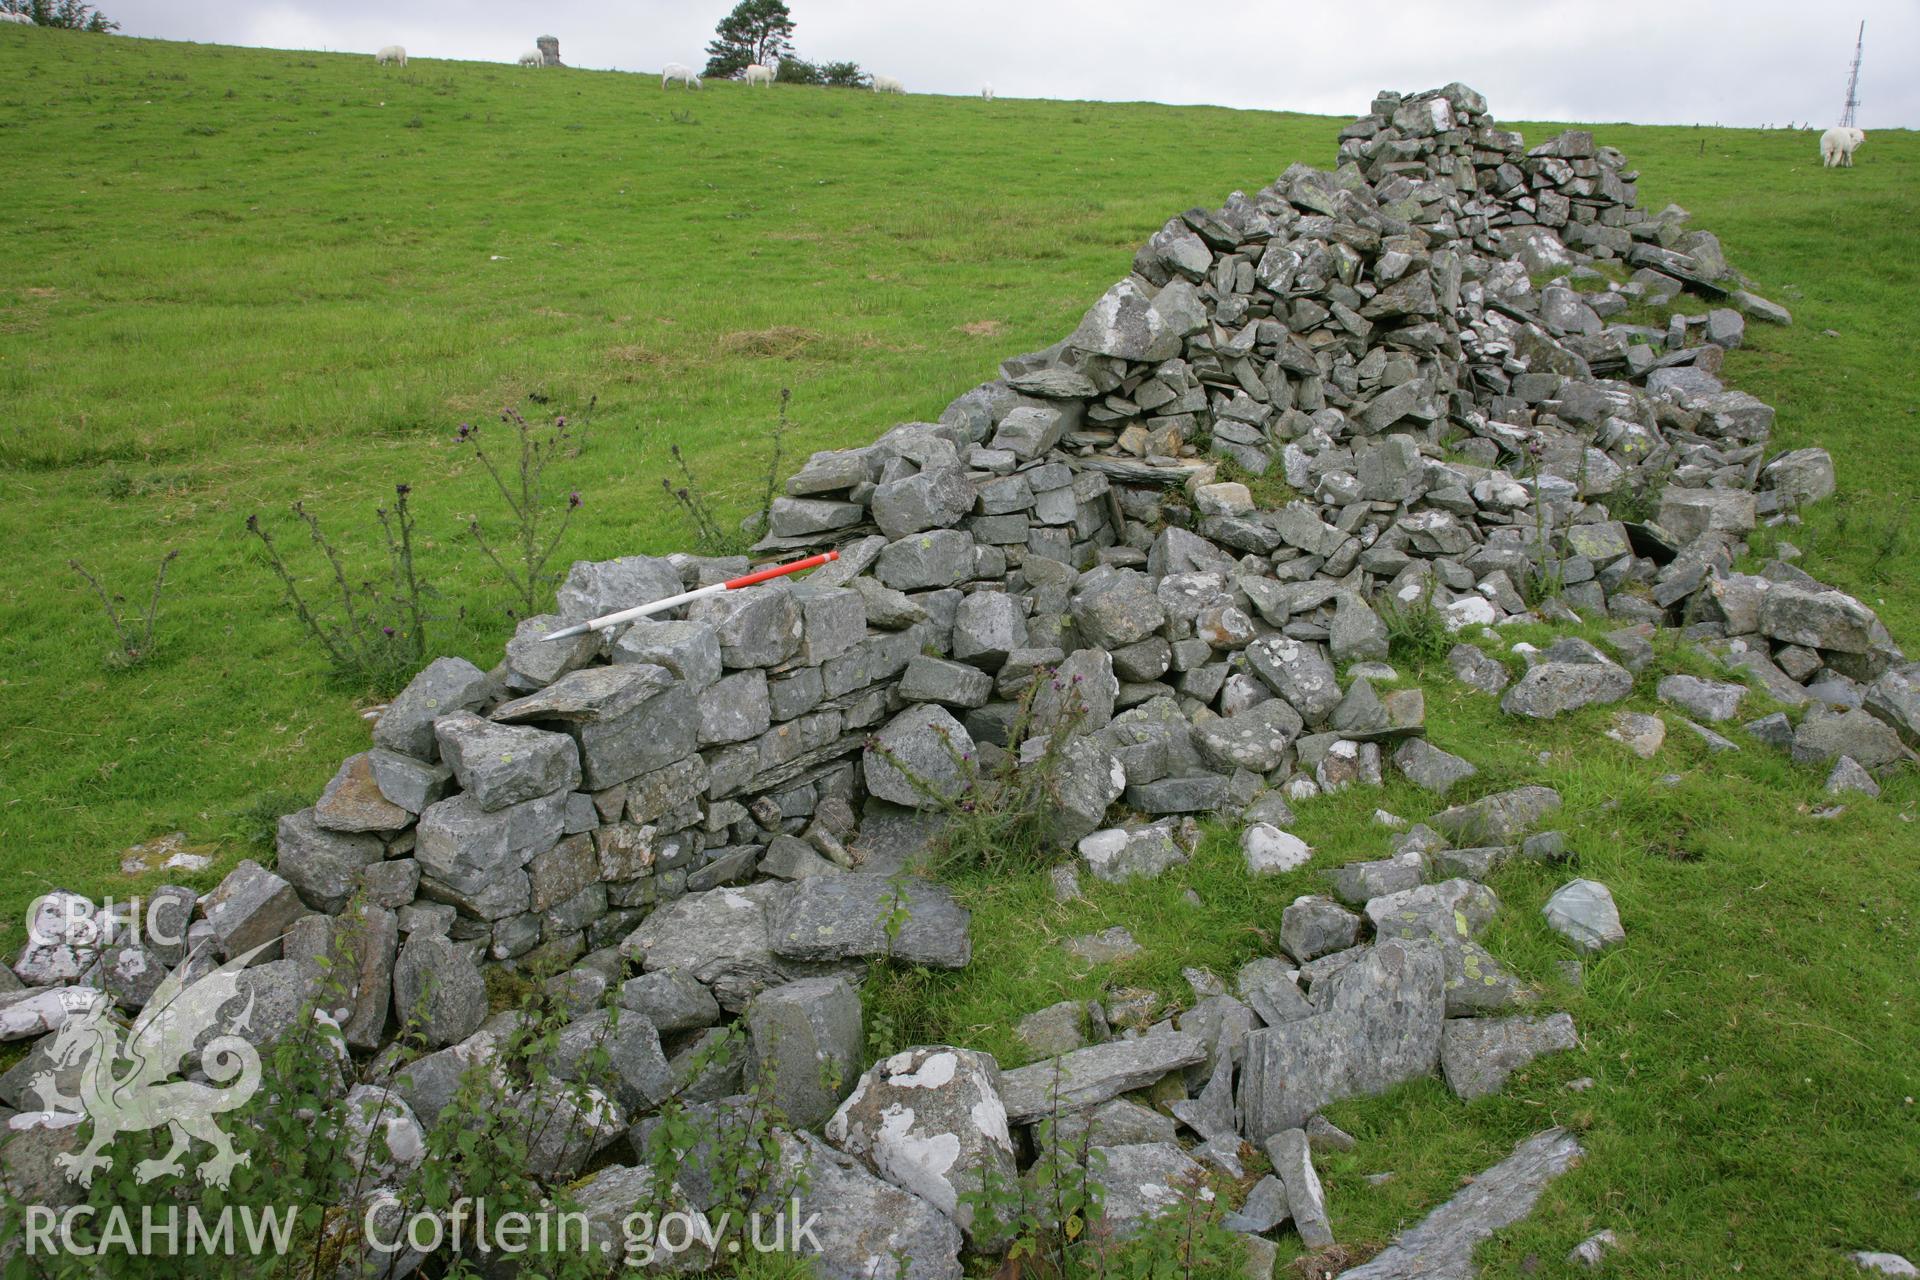 View of partly blocked Roman south-east fort gate, with fragments of Roman stonework visible